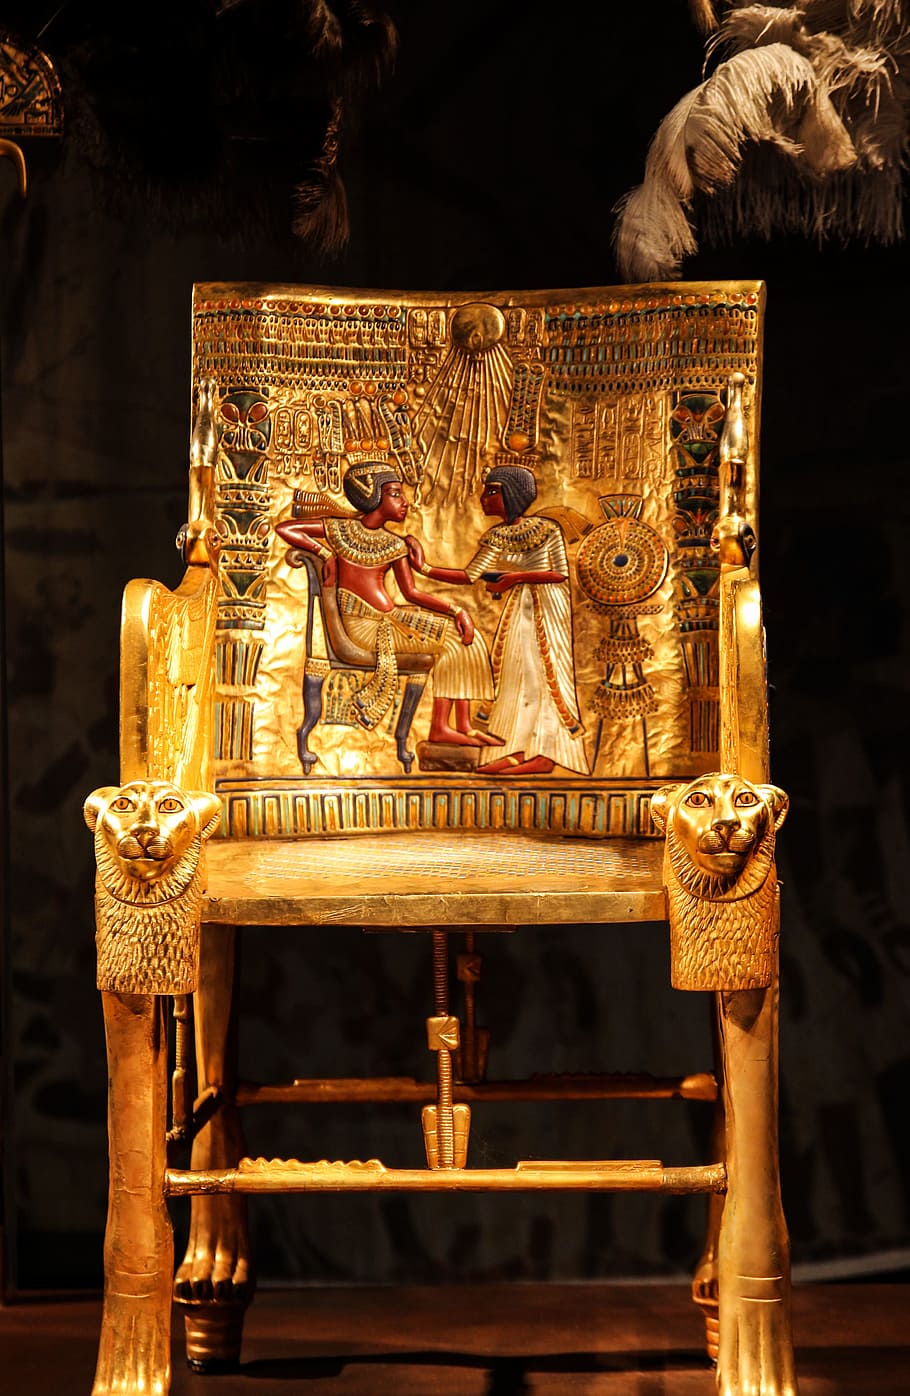 ancient, egypt, engraved, chair, golden, decorated, valuable, treasure, pharaonic, luxor